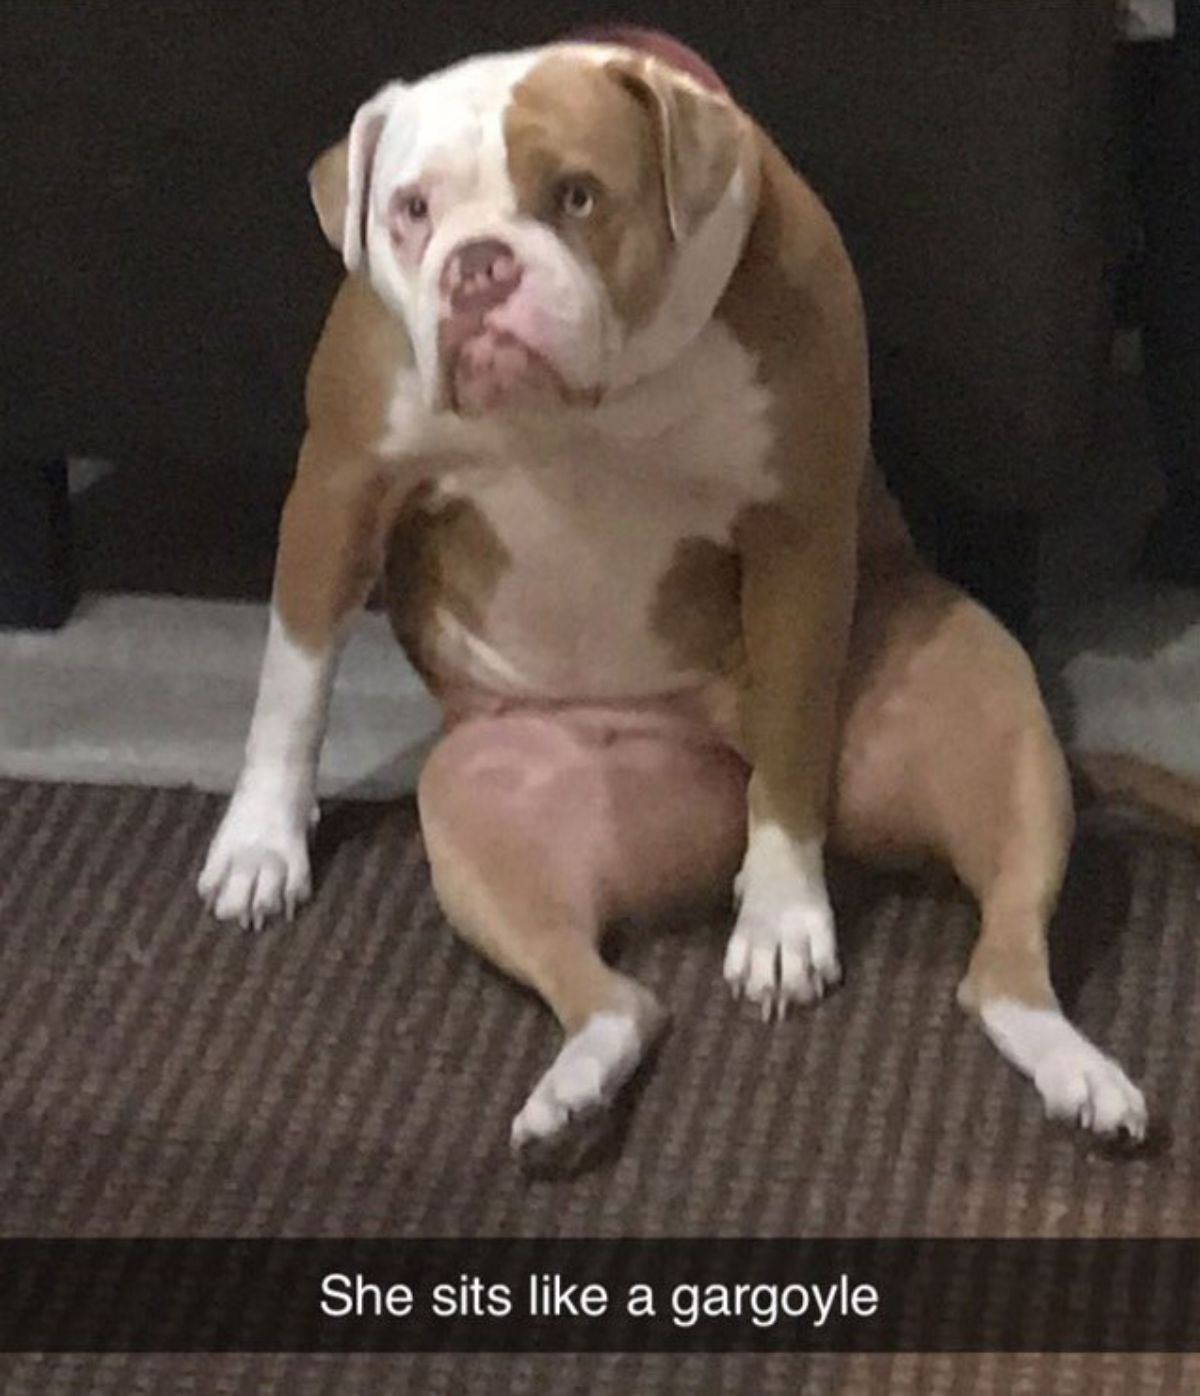 brown and white dog sitting up on its haunches with a caption that says She sits like a gargoyle